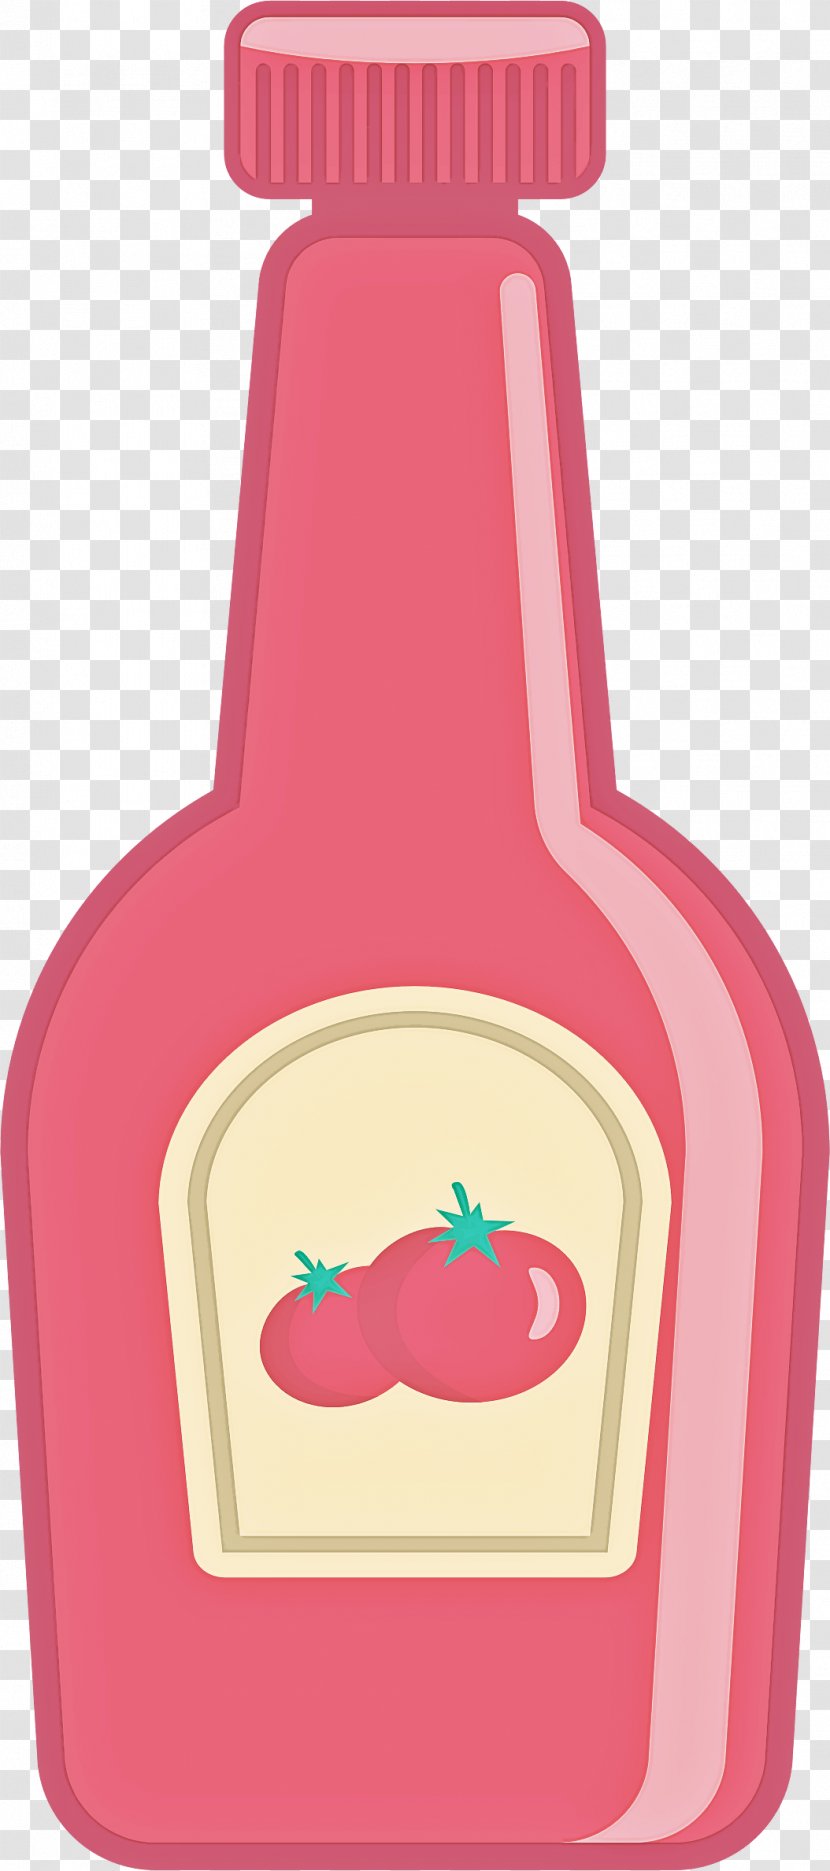 Strawberry - Fruit - Pear Apple Transparent PNG